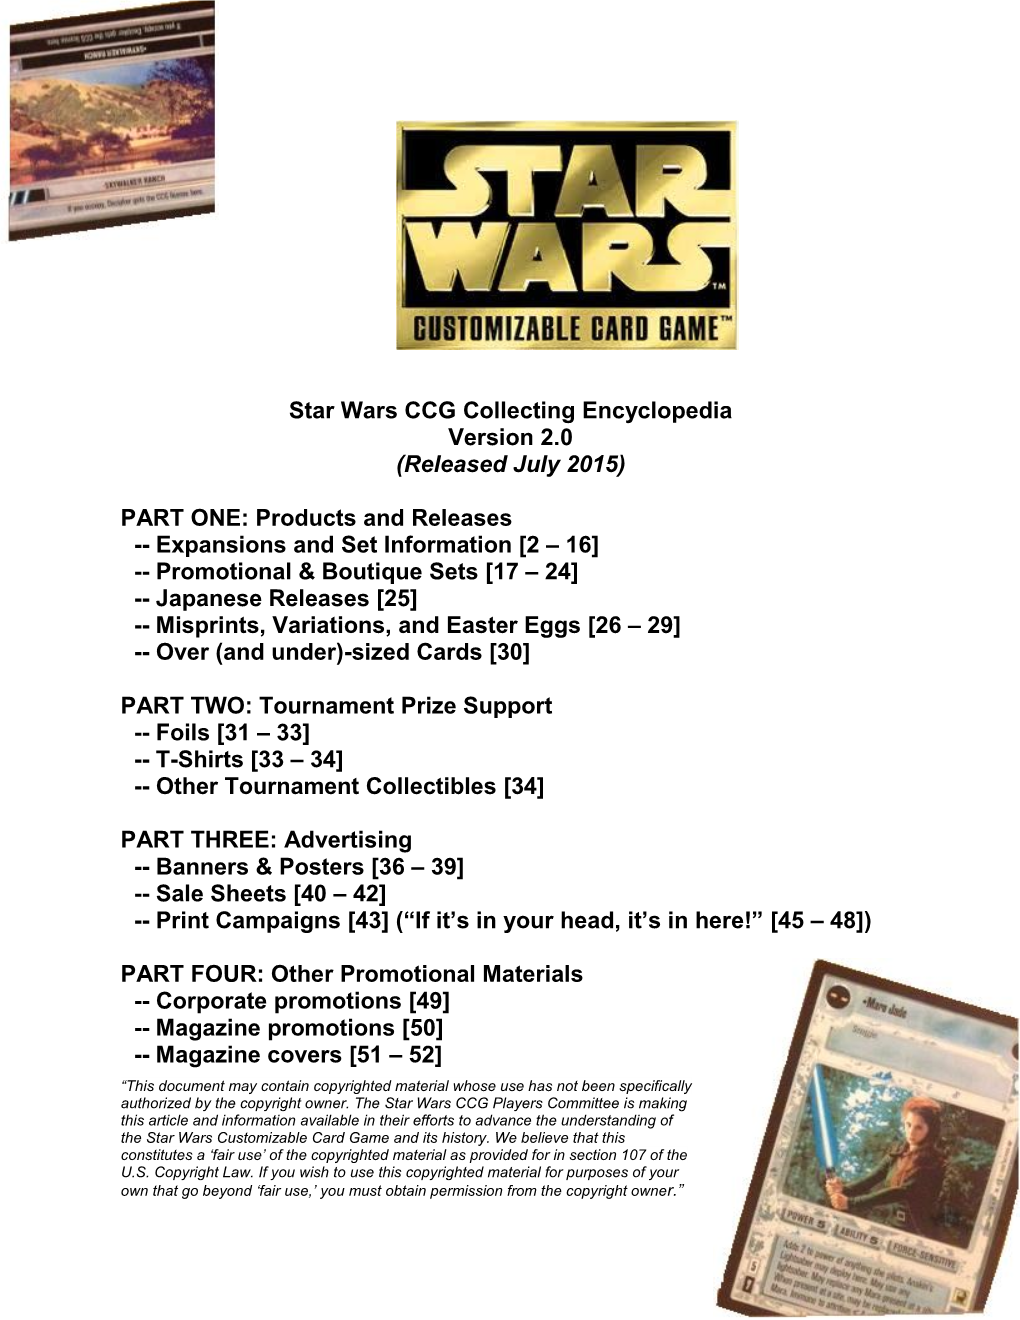 Star Wars CCG Collecting Encyclopedia Version 2.0 (Released July 2015)